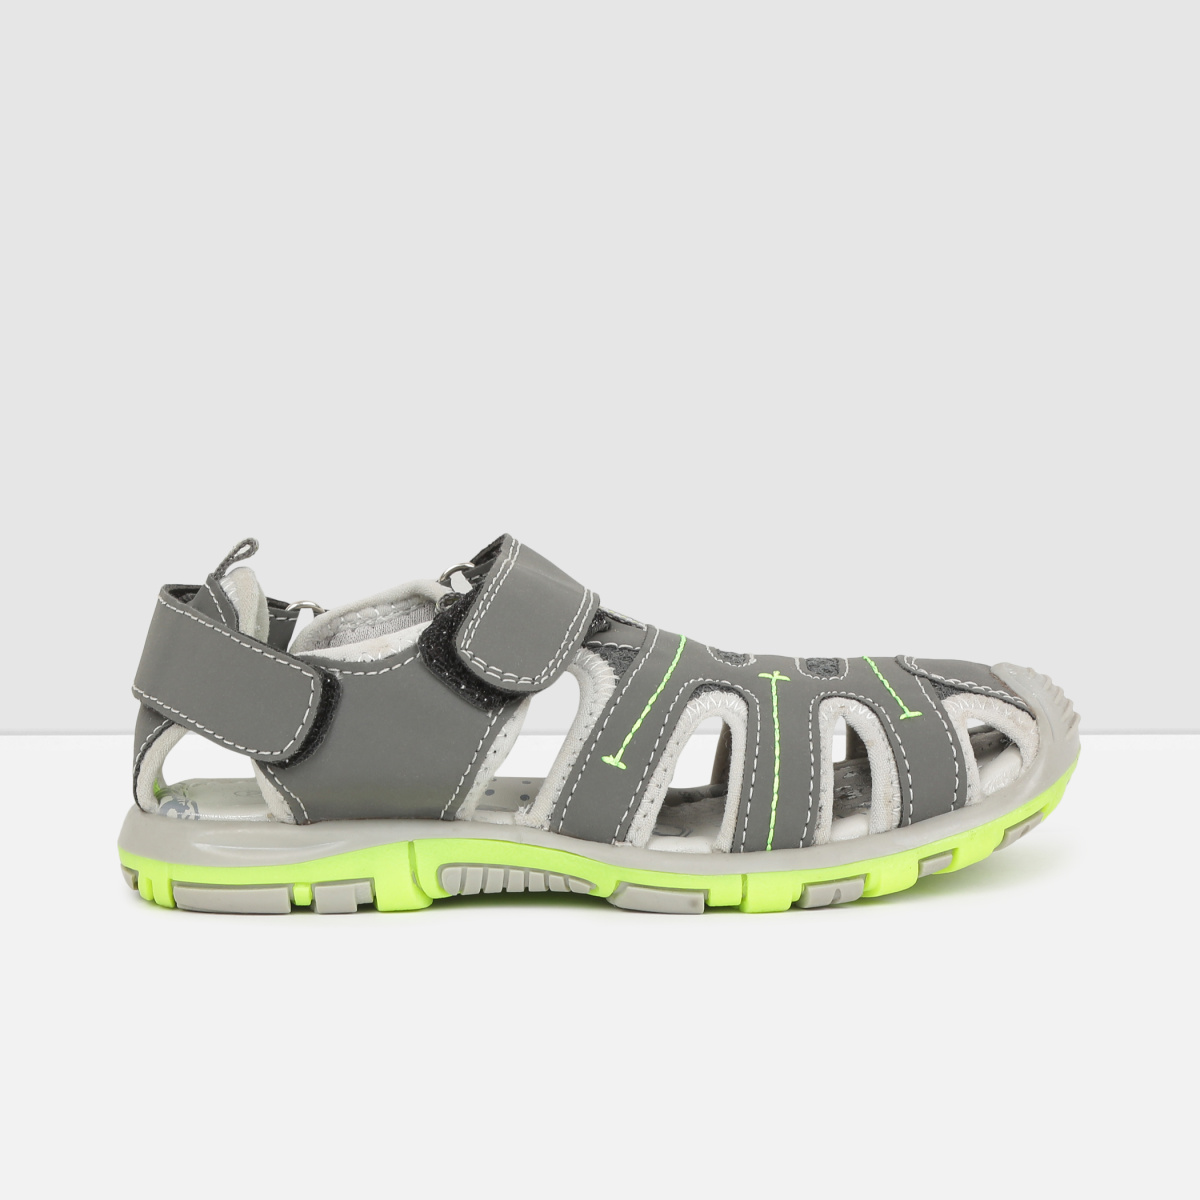 MAX Textured Sandals with Hook and Loop Closure